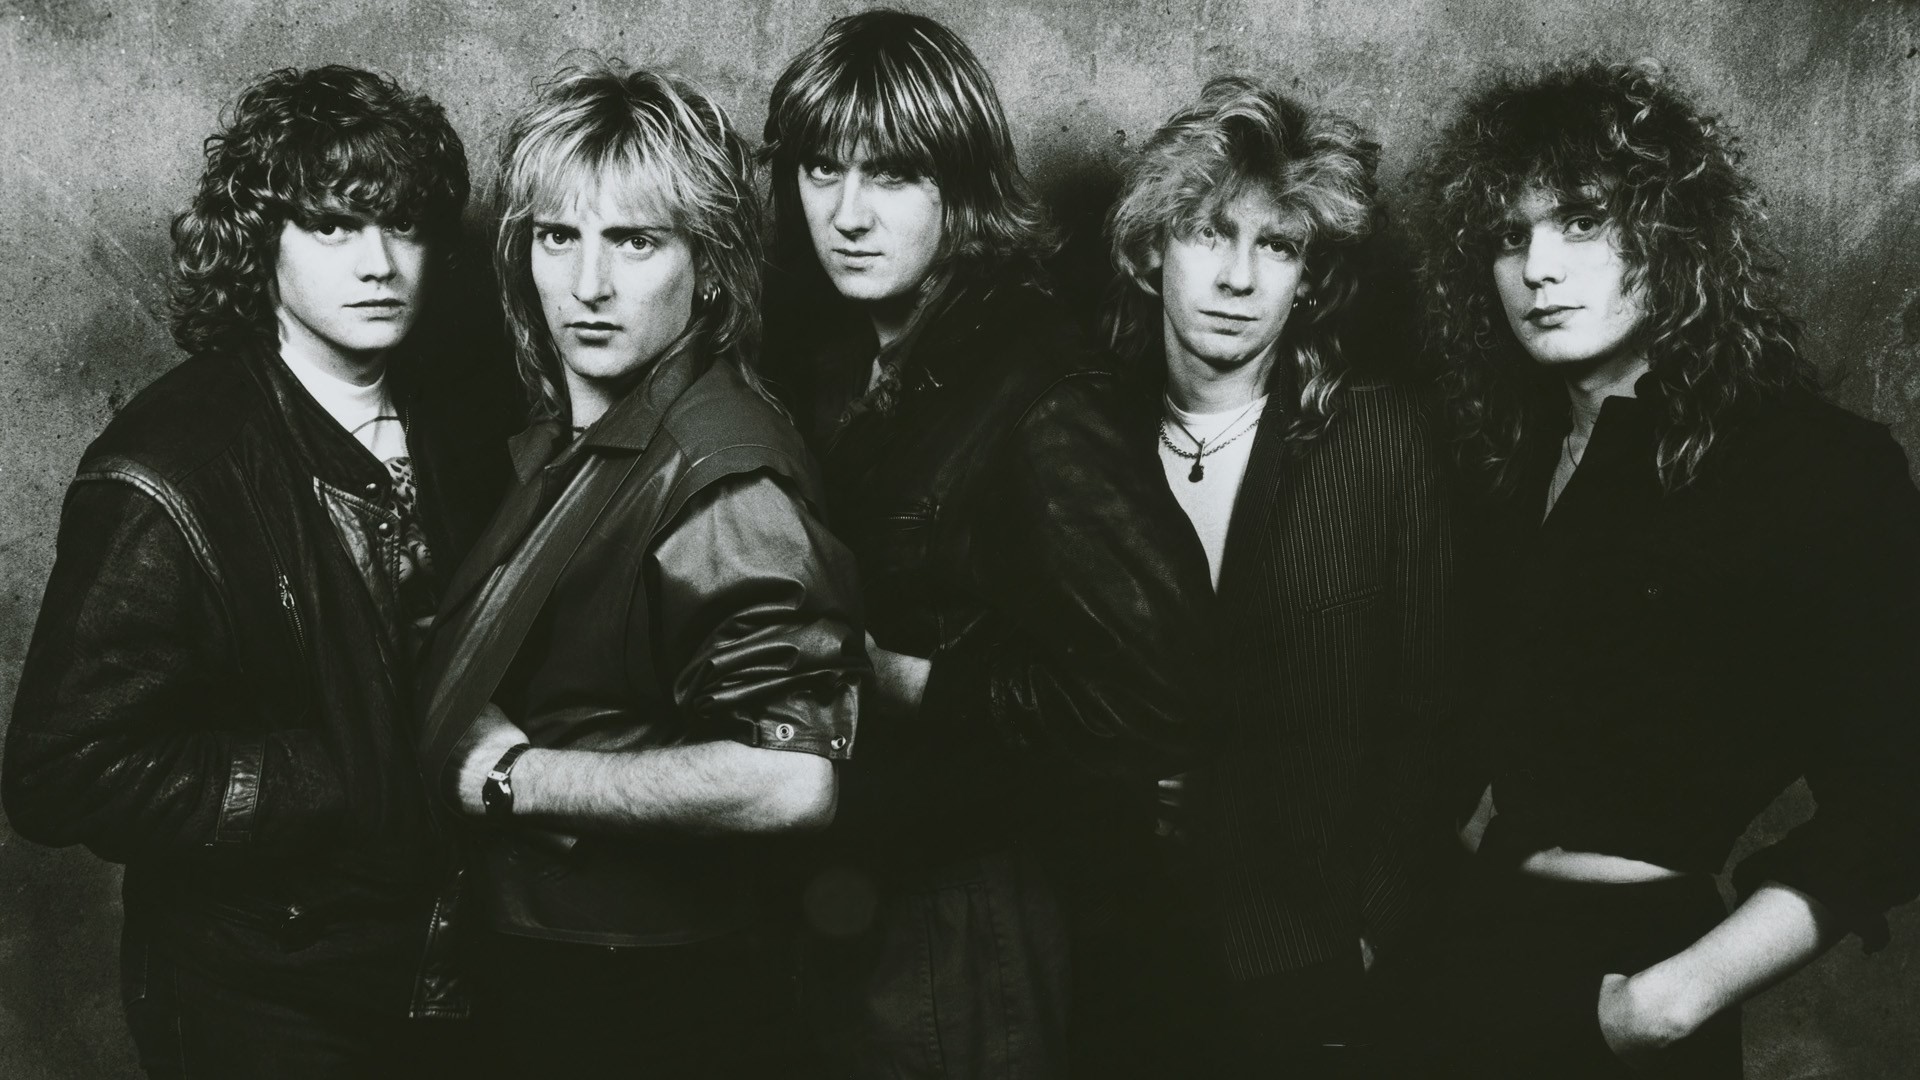 1920x1080  px Full size def leppard image by Chancey Blare for :  pocketfullofgrace.com